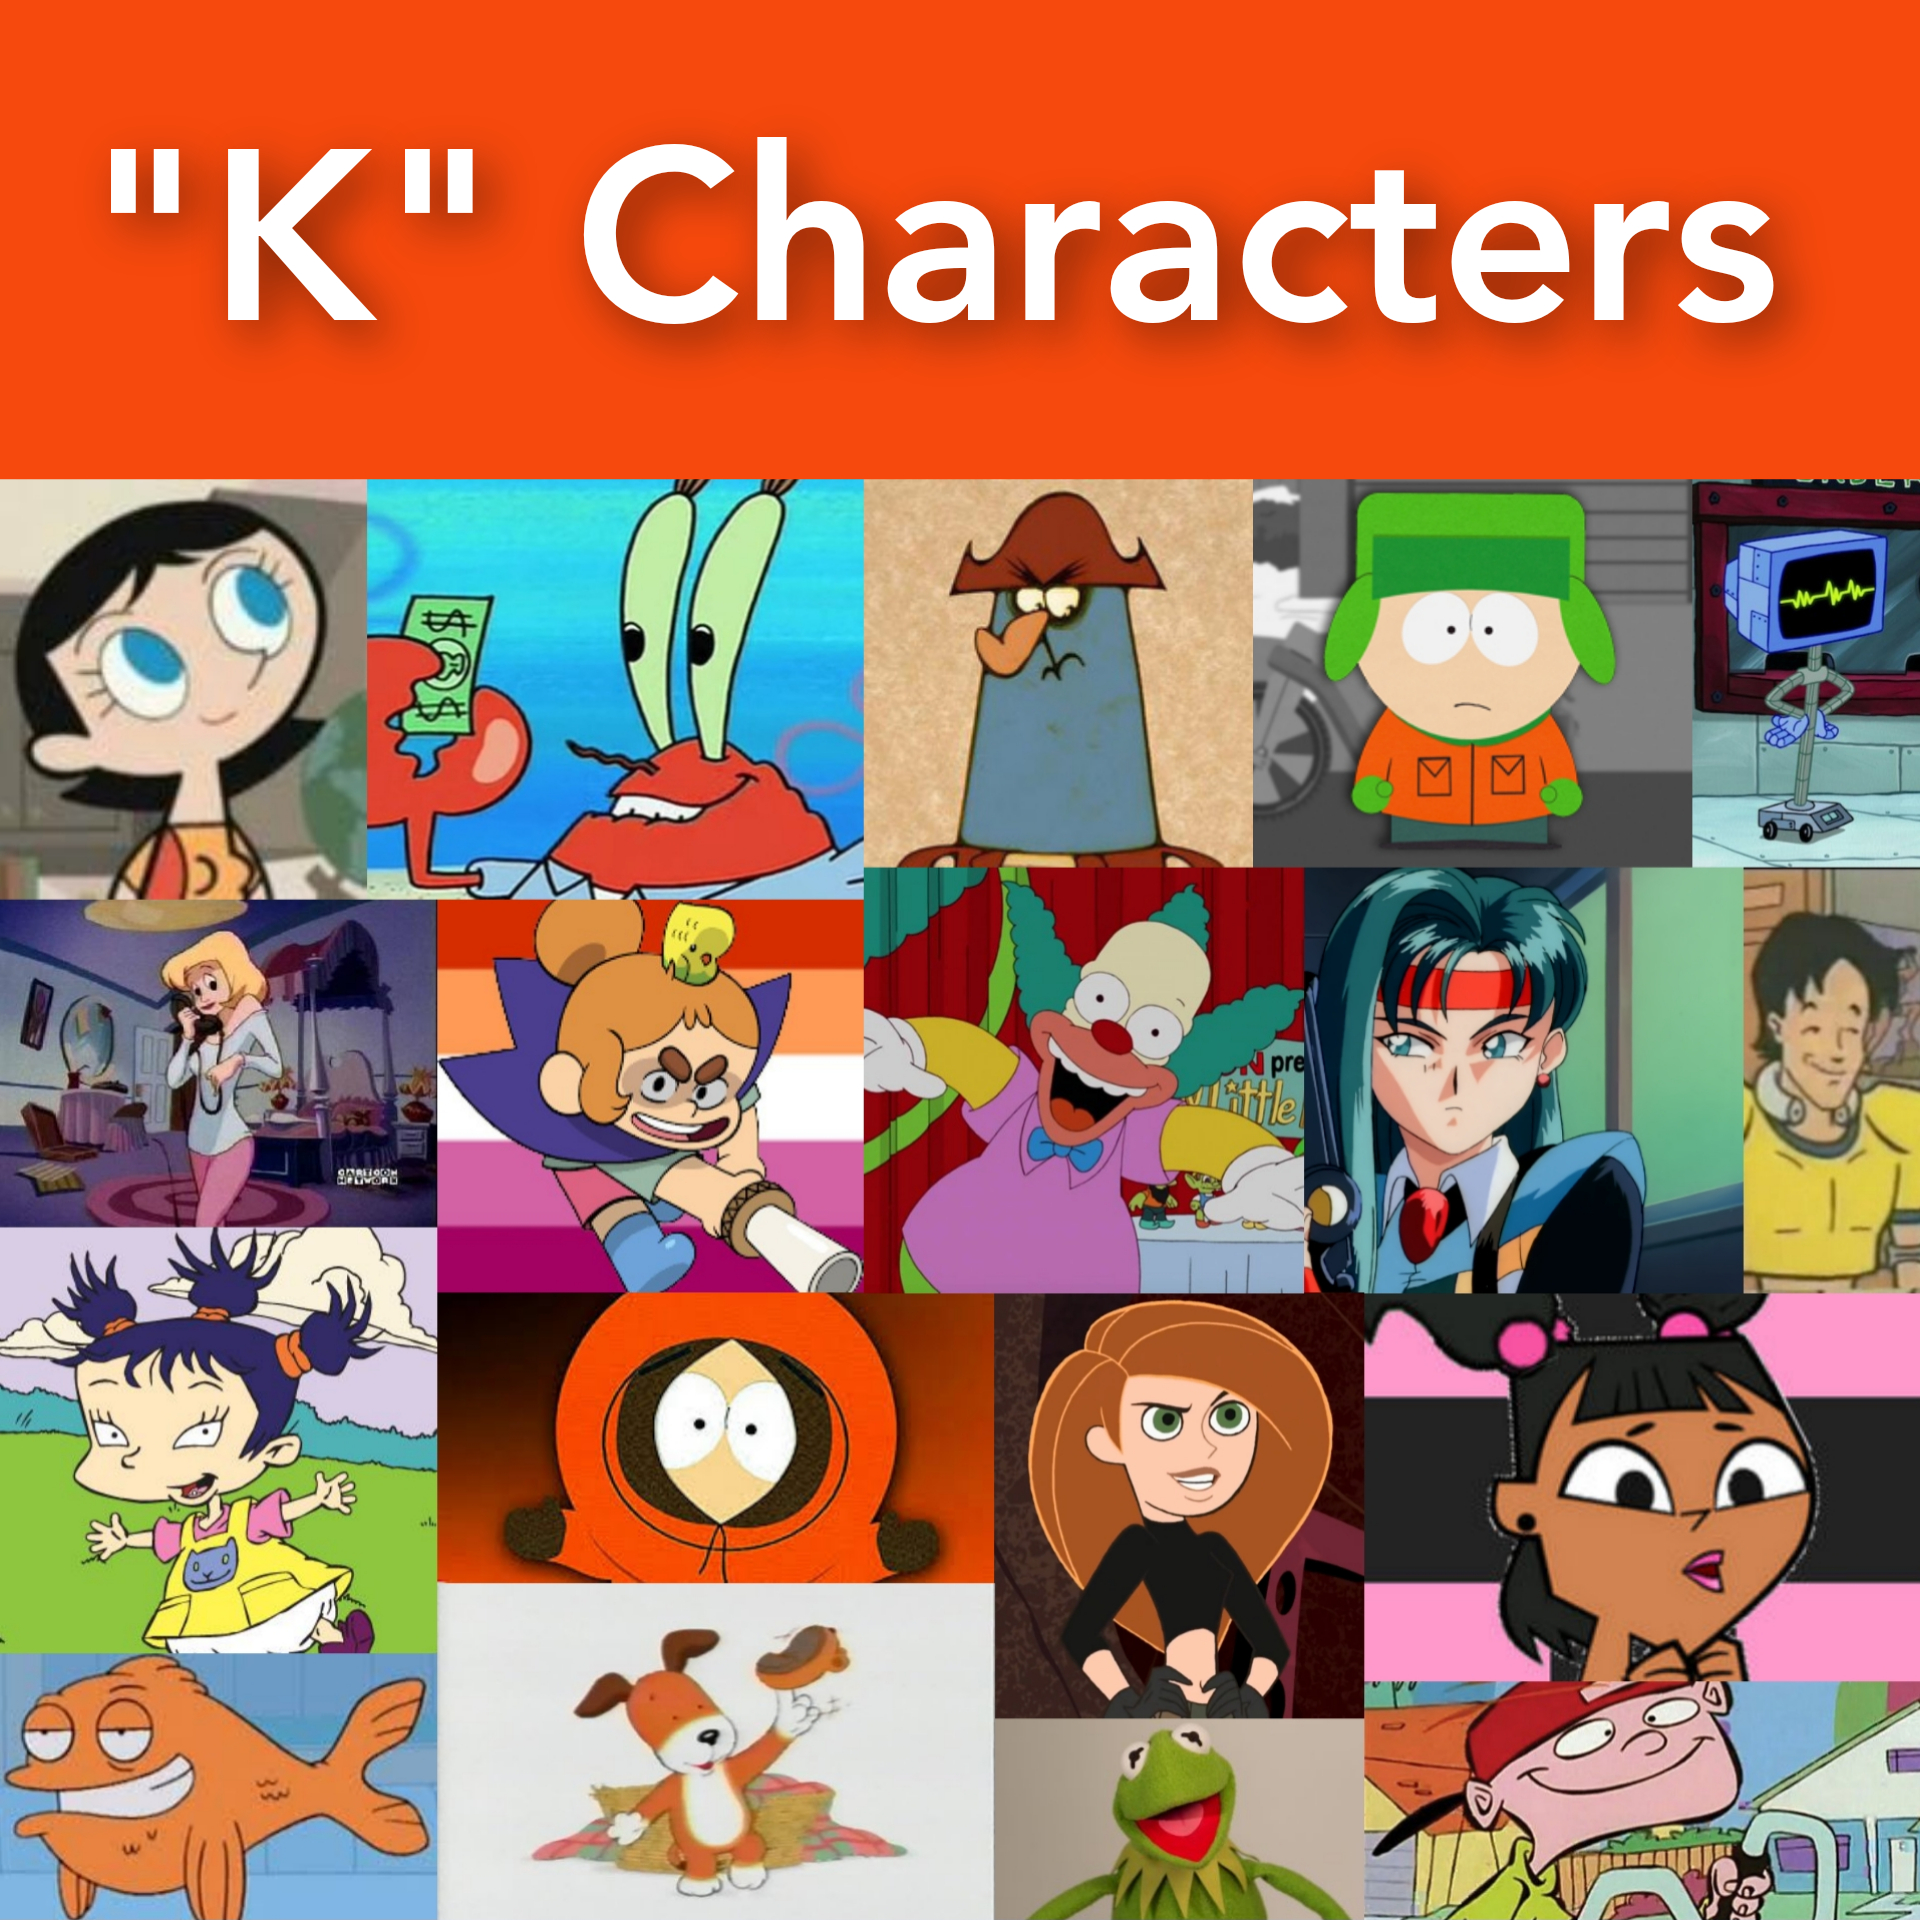 The K Charaters